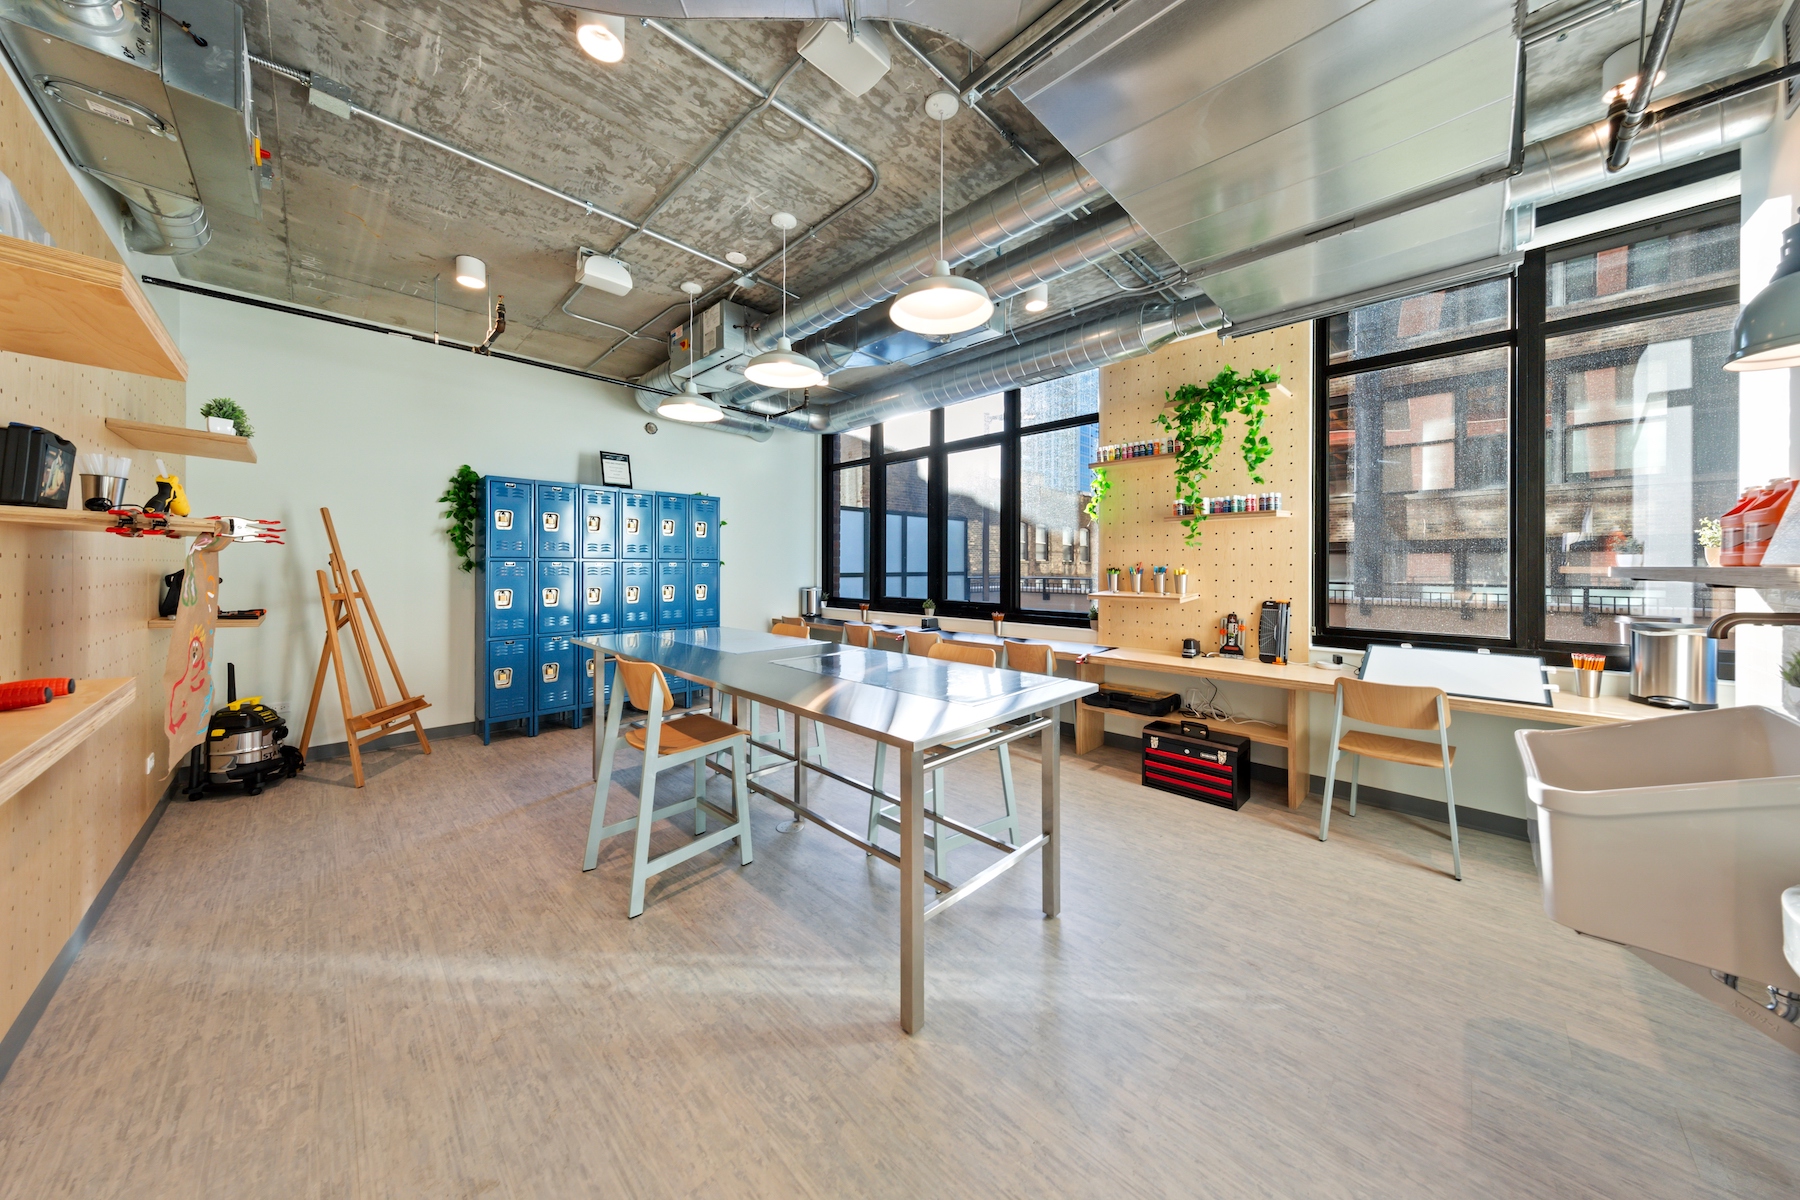 AMLI 808 in Chicago offers downtown living with a plethora of work-from-home amenities, including an on-site podcast studio and a DIY studio for makers and builders.